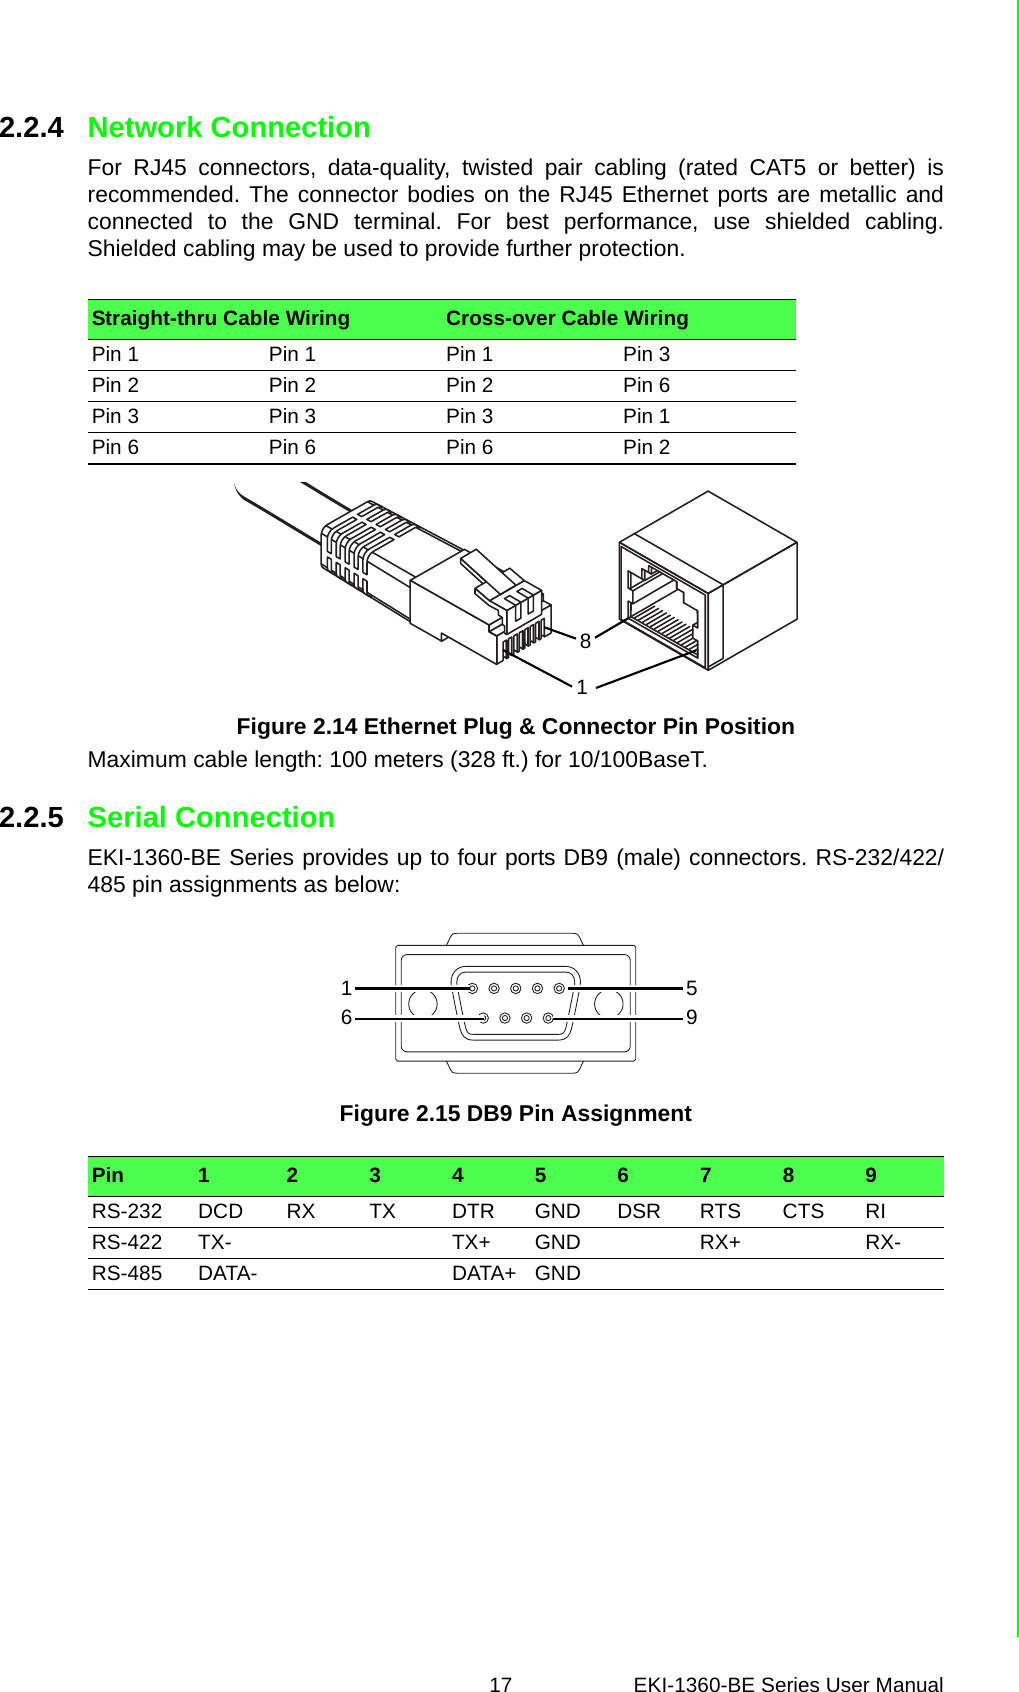 17 EKI-1360-BE Series User Manual 2.2.4 Network ConnectionFor RJ45 connectors, data-quality, twisted pair cabling (rated CAT5 or better) isrecommended. The connector bodies on the RJ45 Ethernet ports are metallic andconnected to the GND terminal. For best performance, use shielded cabling.Shielded cabling may be used to provide further protection.Figure 2.14 Ethernet Plug &amp; Connector Pin PositionMaximum cable length: 100 meters (328 ft.) for 10/100BaseT.2.2.5 Serial ConnectionEKI-1360-BE Series provides up to four ports DB9 (male) connectors. RS-232/422/485 pin assignments as below:Figure 2.15 DB9 Pin AssignmentStraight-thru Cable Wiring Cross-over Cable WiringPin 1 Pin 1 Pin 1 Pin 3Pin 2 Pin 2 Pin 2 Pin 6Pin 3 Pin 3 Pin 3 Pin 1Pin 6 Pin 6 Pin 6 Pin 218Pin 1 2 3 4 5 6 7 8 9RS-232 DCD RX TX DTR GND DSR RTS CTS RIRS-422 TX- TX+ GND RX+ RX-RS-485 DATA- DATA+ GND1965